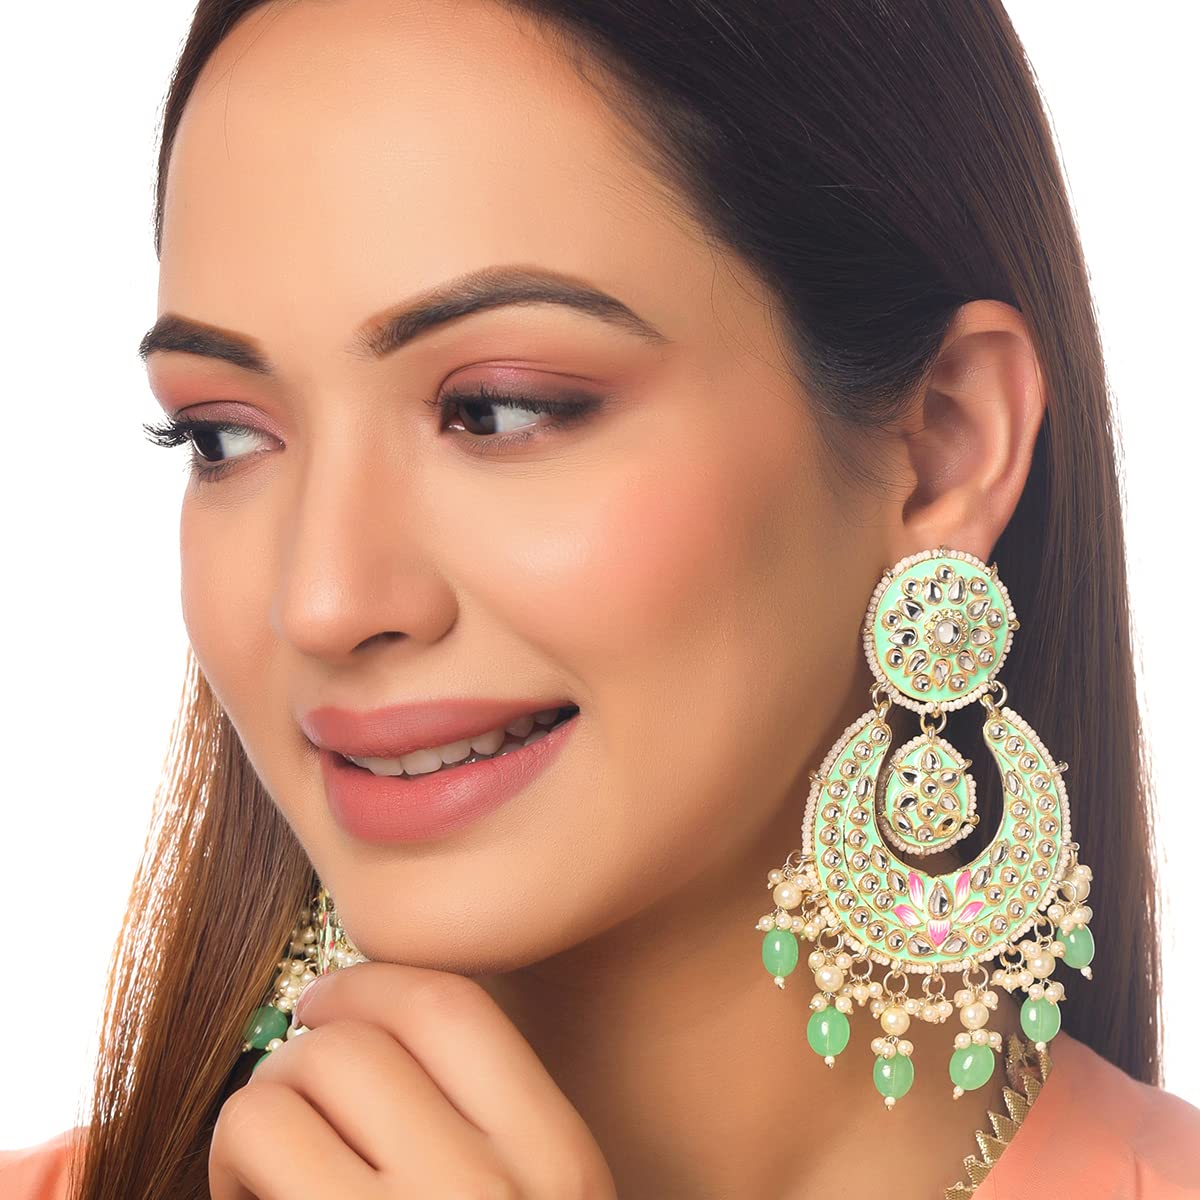 Yellow Chimes Earrings for Women and Girls Traditional Meenakari Chandbali  Gold Toned Green Meenakari Chandbali Earrings  Birthday Gift for girls and women Anniversary Gift for Wife